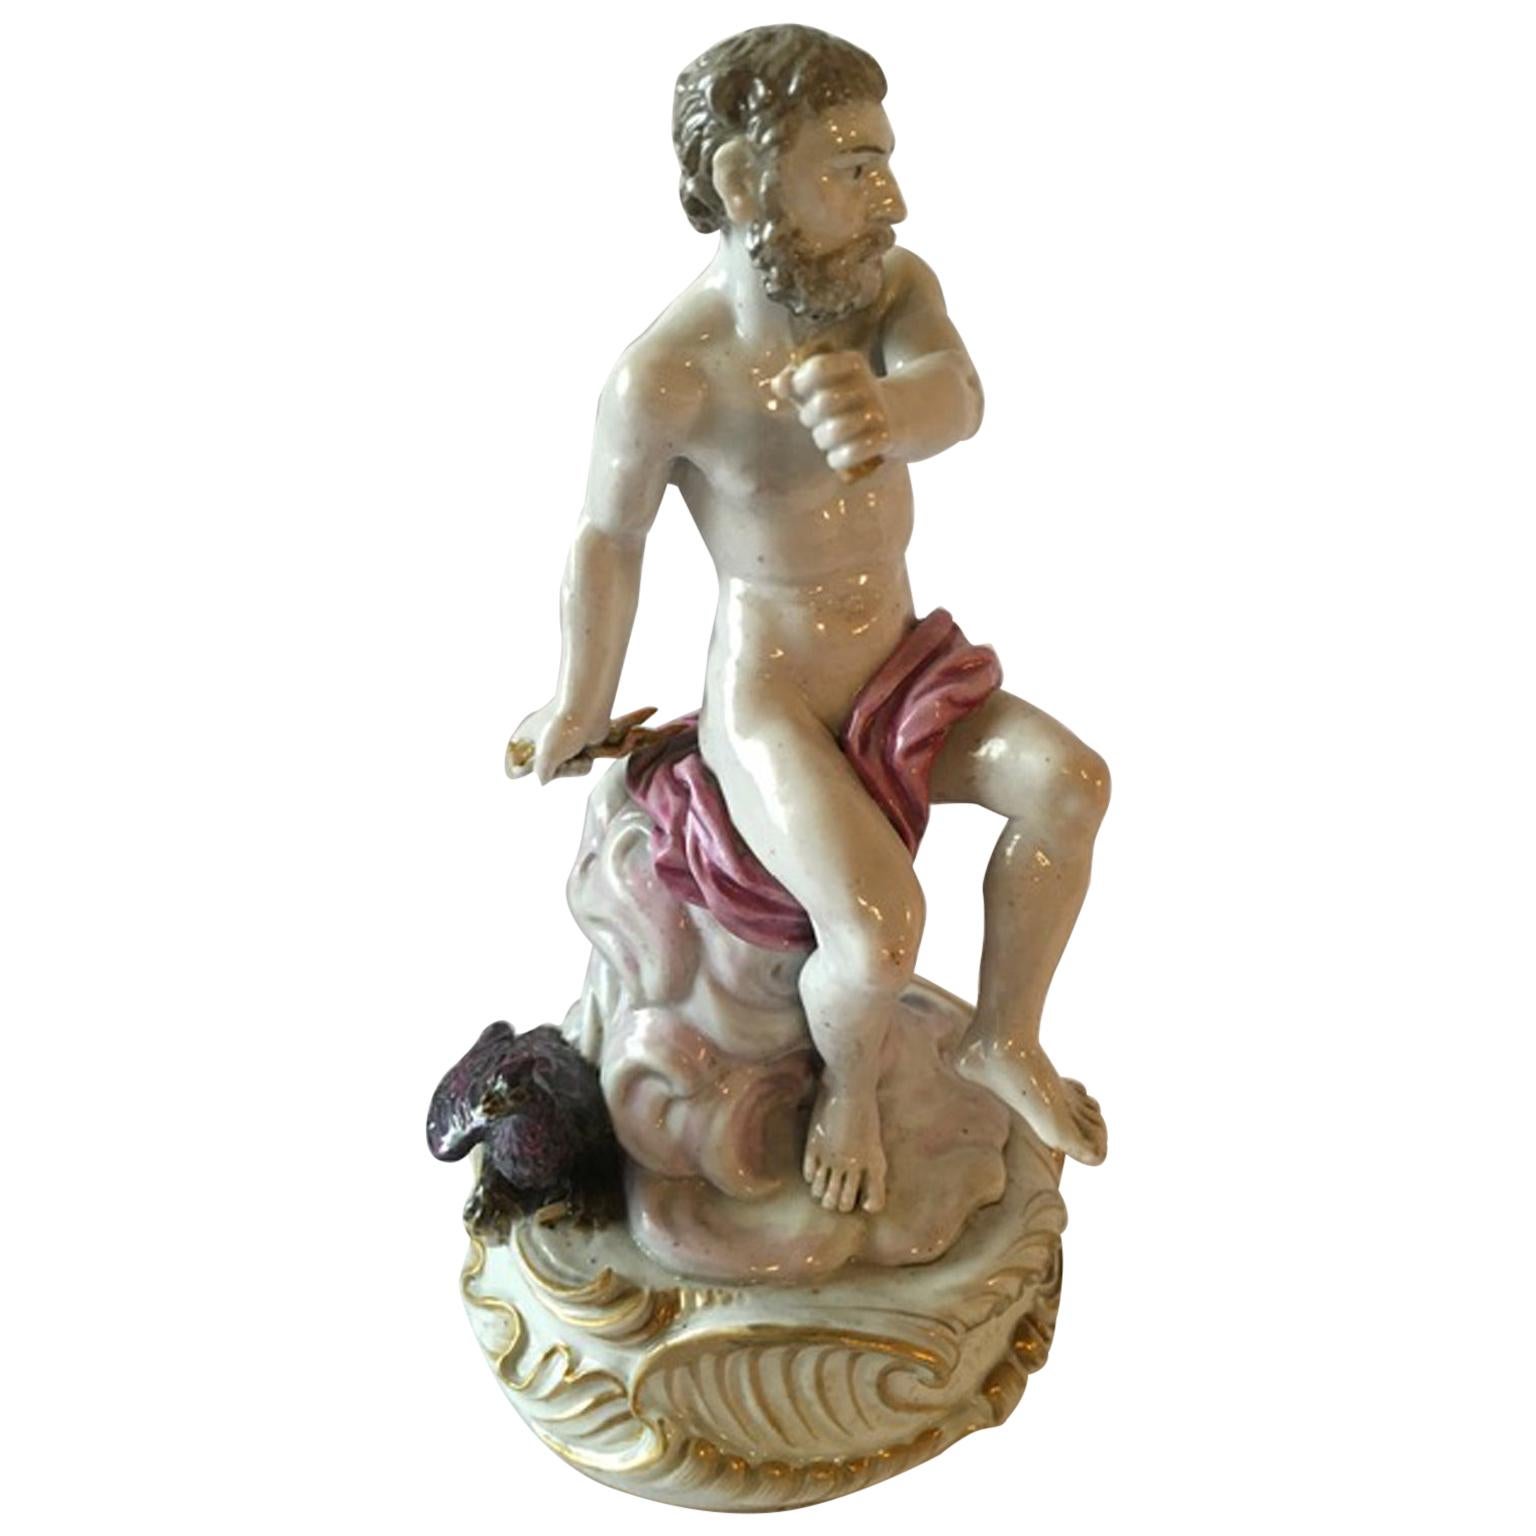 Europe 18th Century Attribuited to Meissen Porcelain Giove Figurine